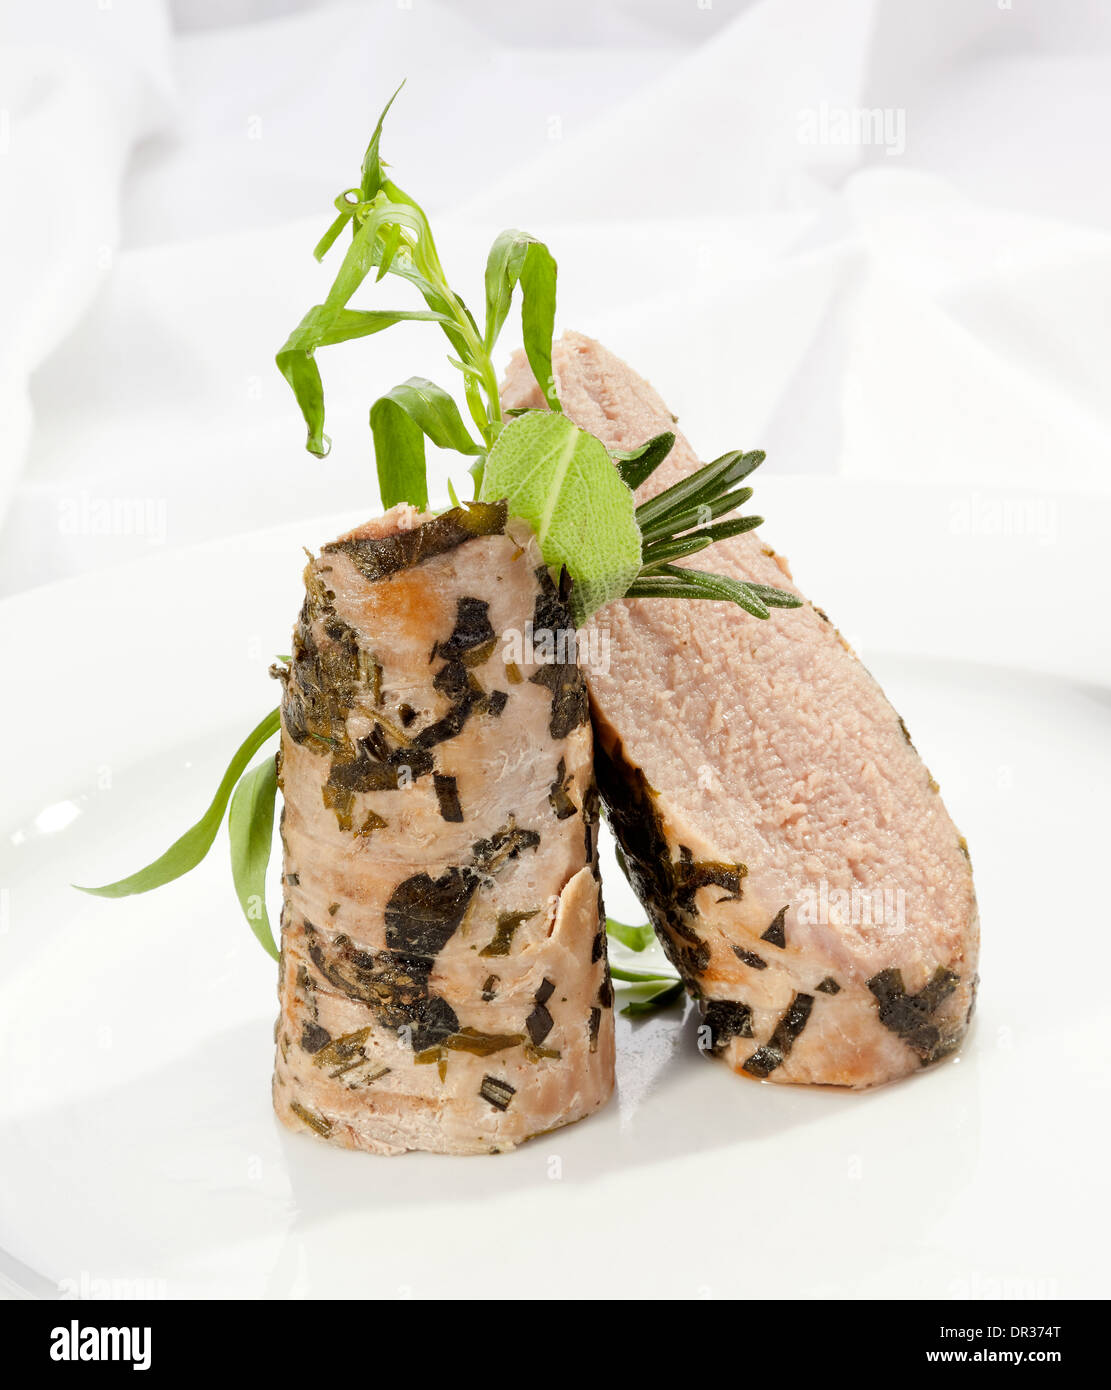 Grilled Sirloin with fresh green herbs Stock Photo